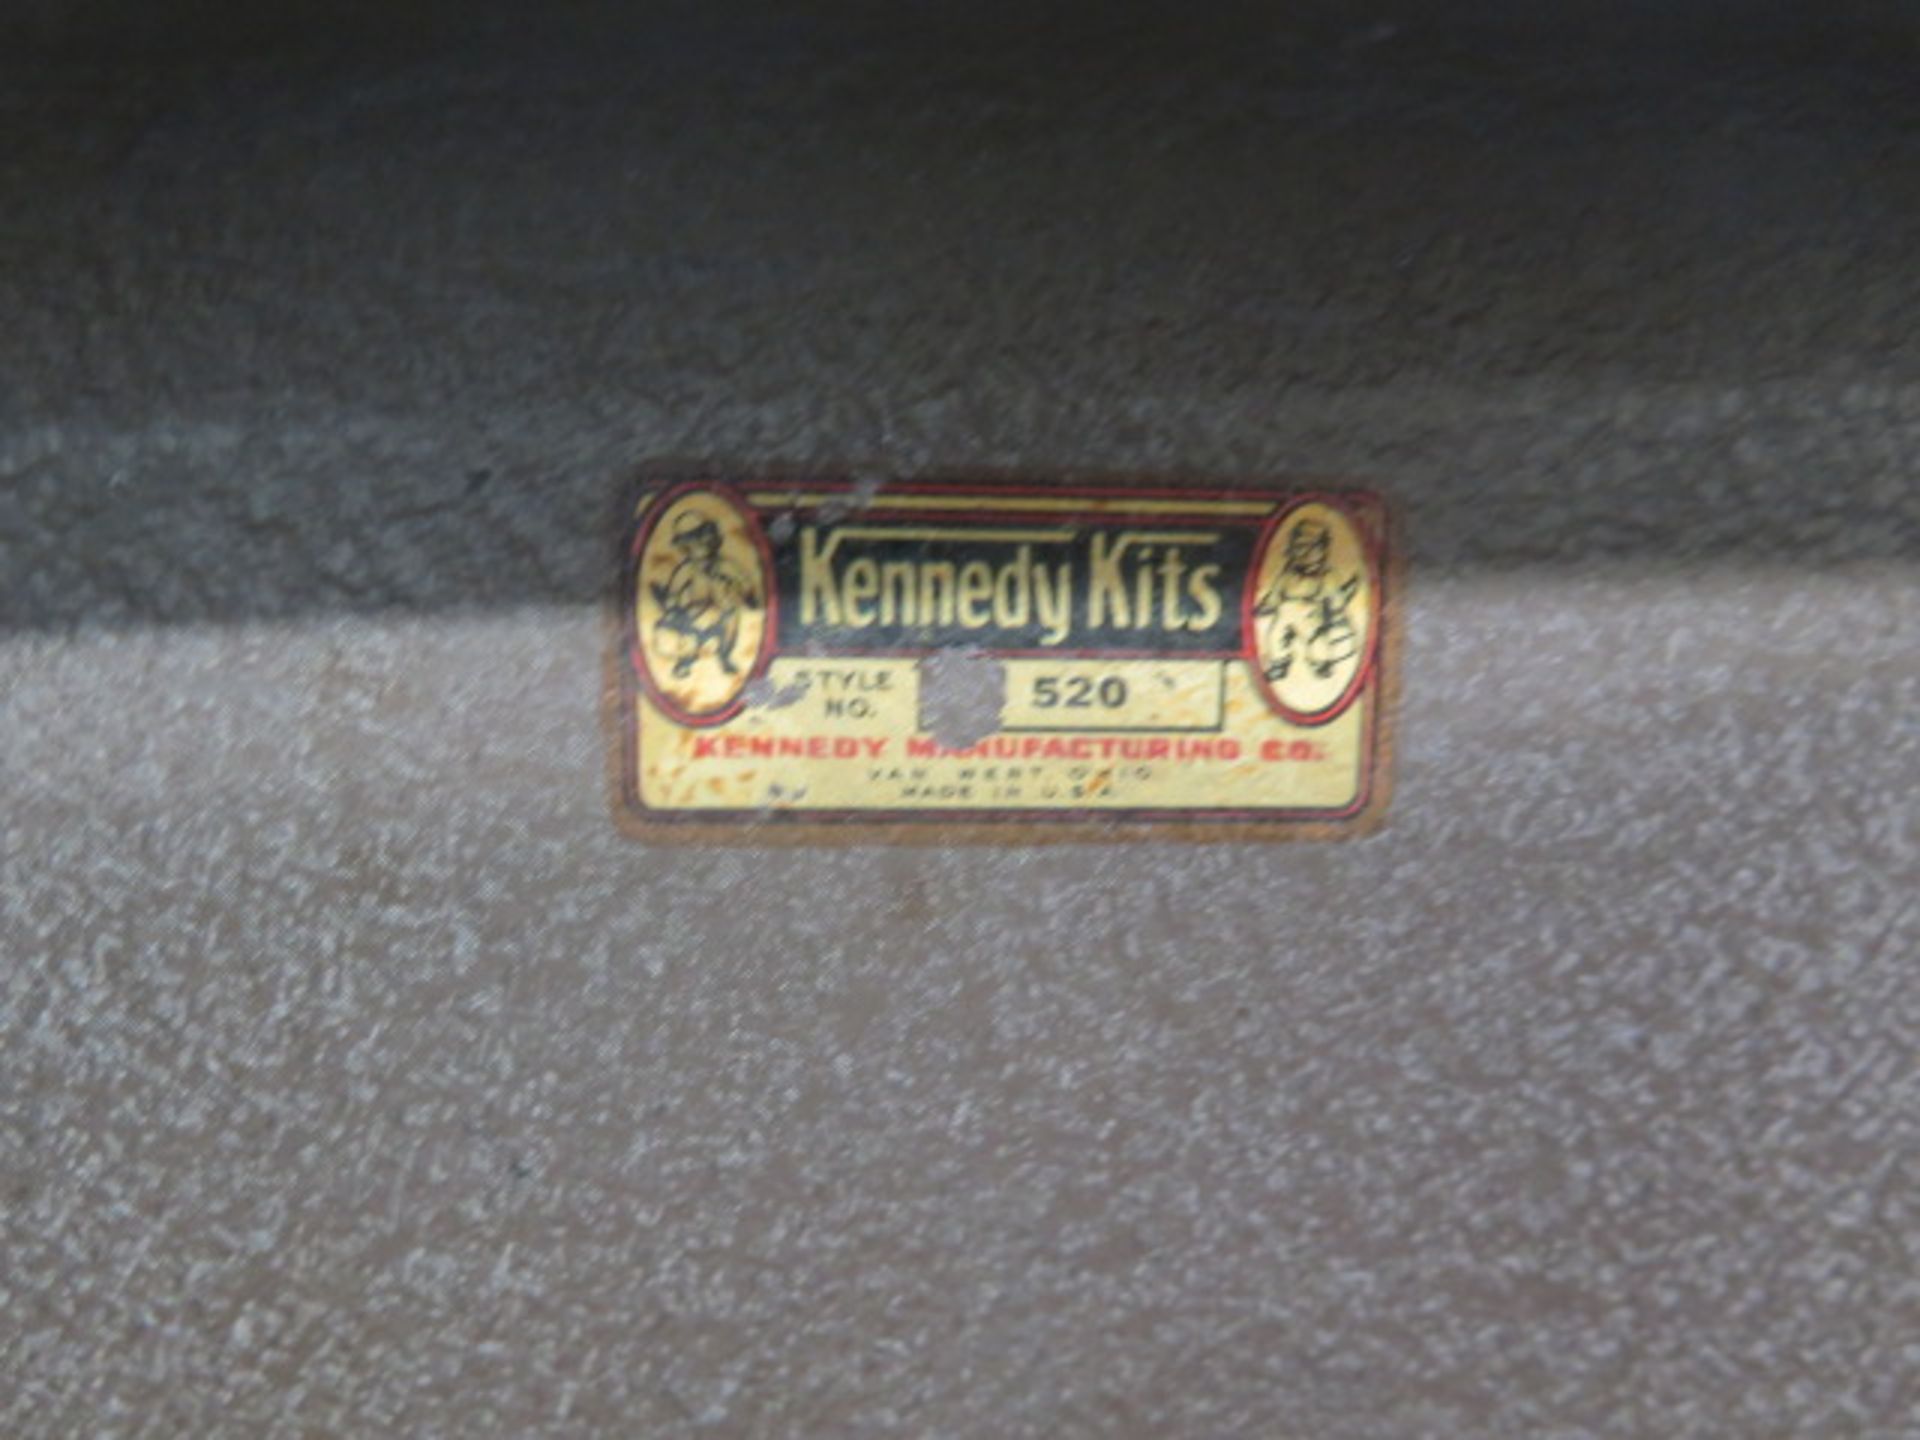 Kennedy Tool Box (SOLD AS-IS - NO WARRANTY) - Image 6 of 6